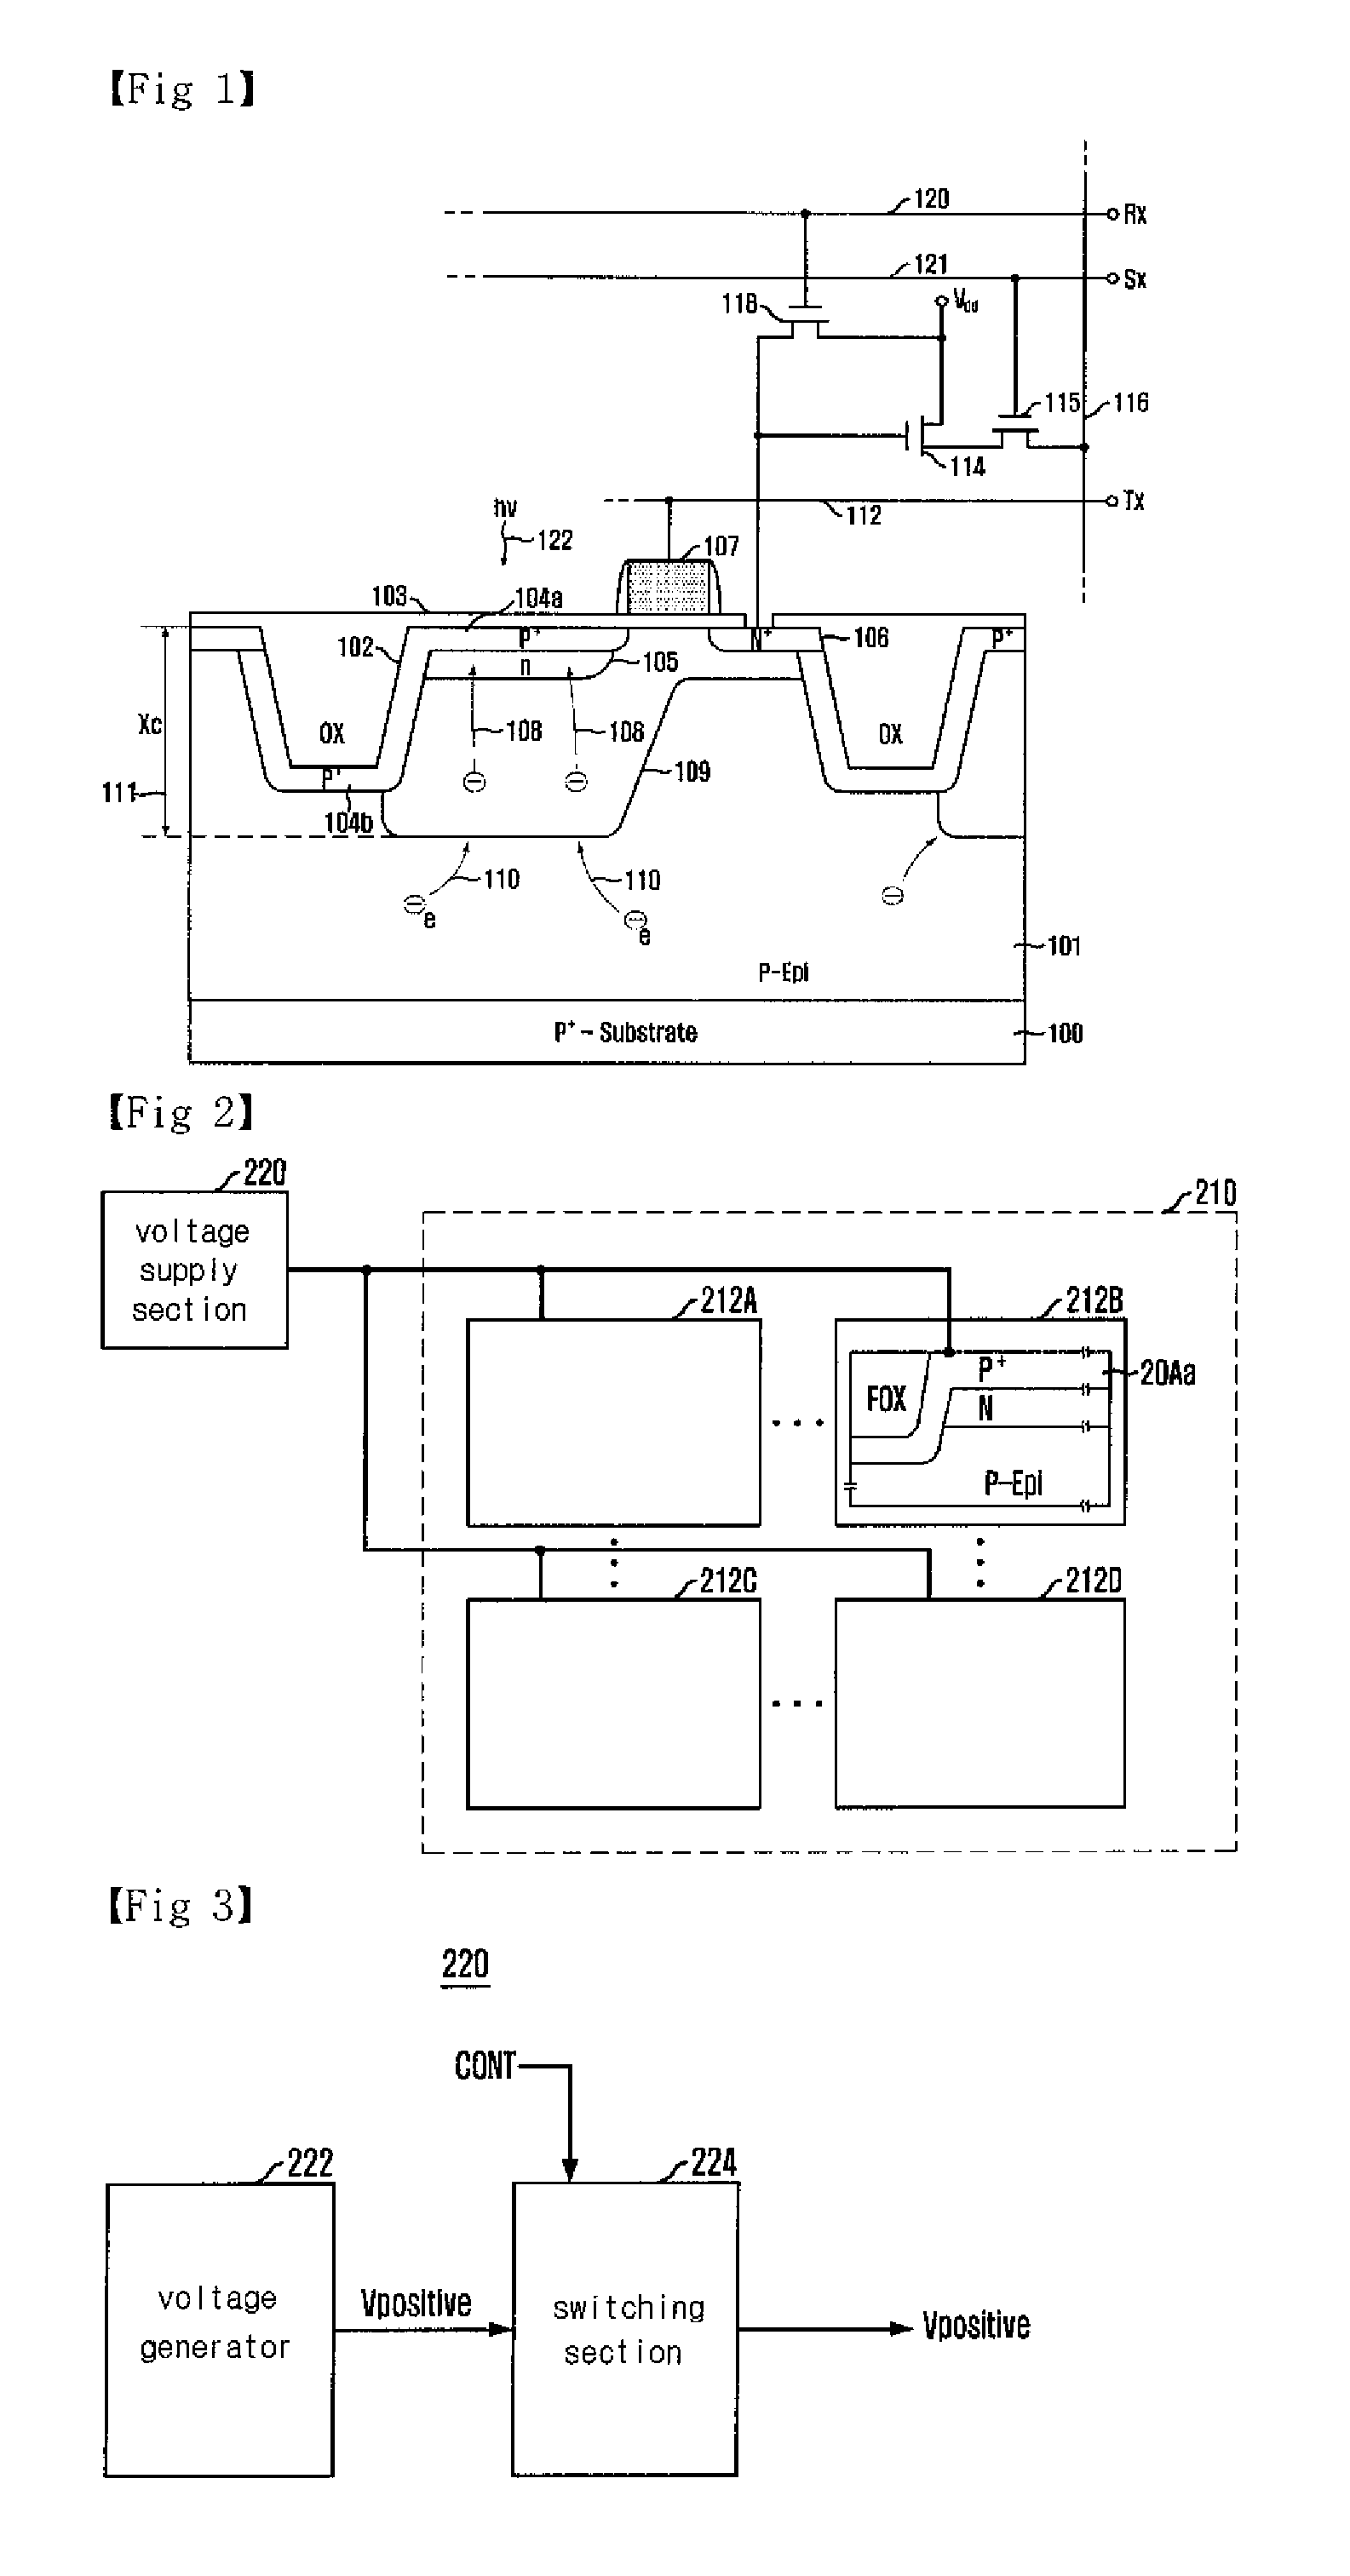 Pixel of image sensor having electrically controllable pinning layer